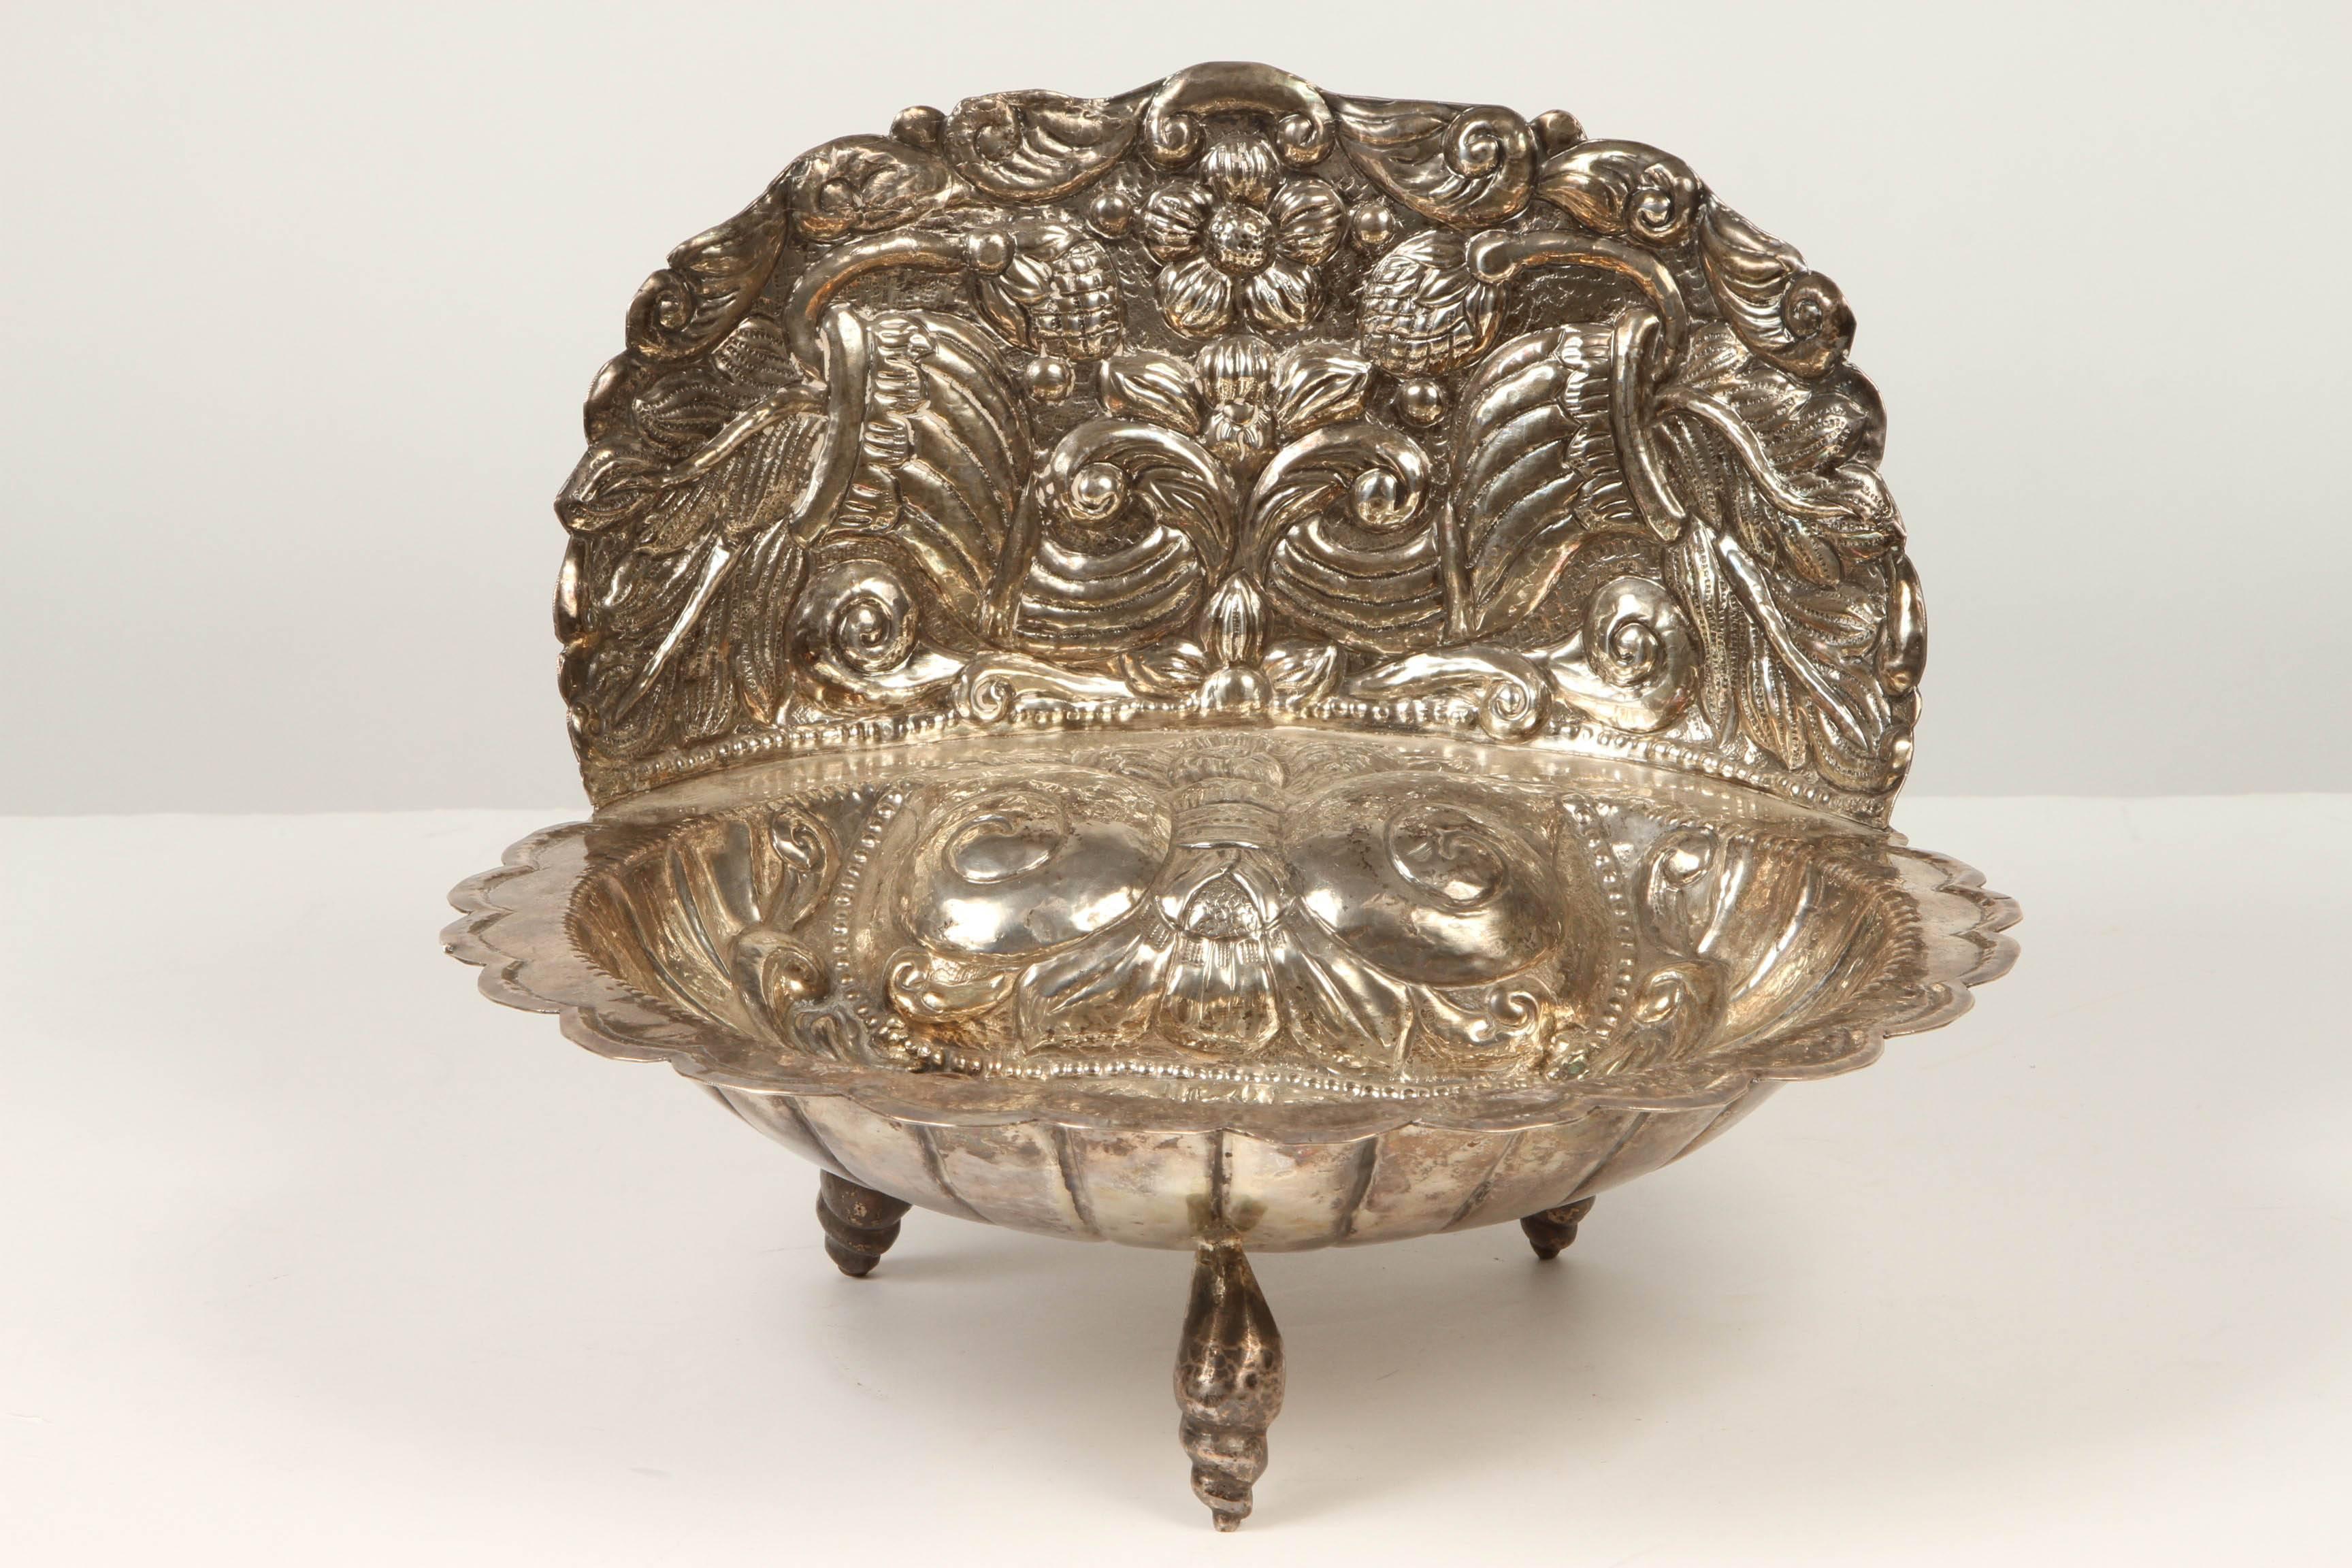 A silver font, covered with scrolling and floral patterns in the silver. Four feet and a raised sort of backsplash which is also elaborately engraved.